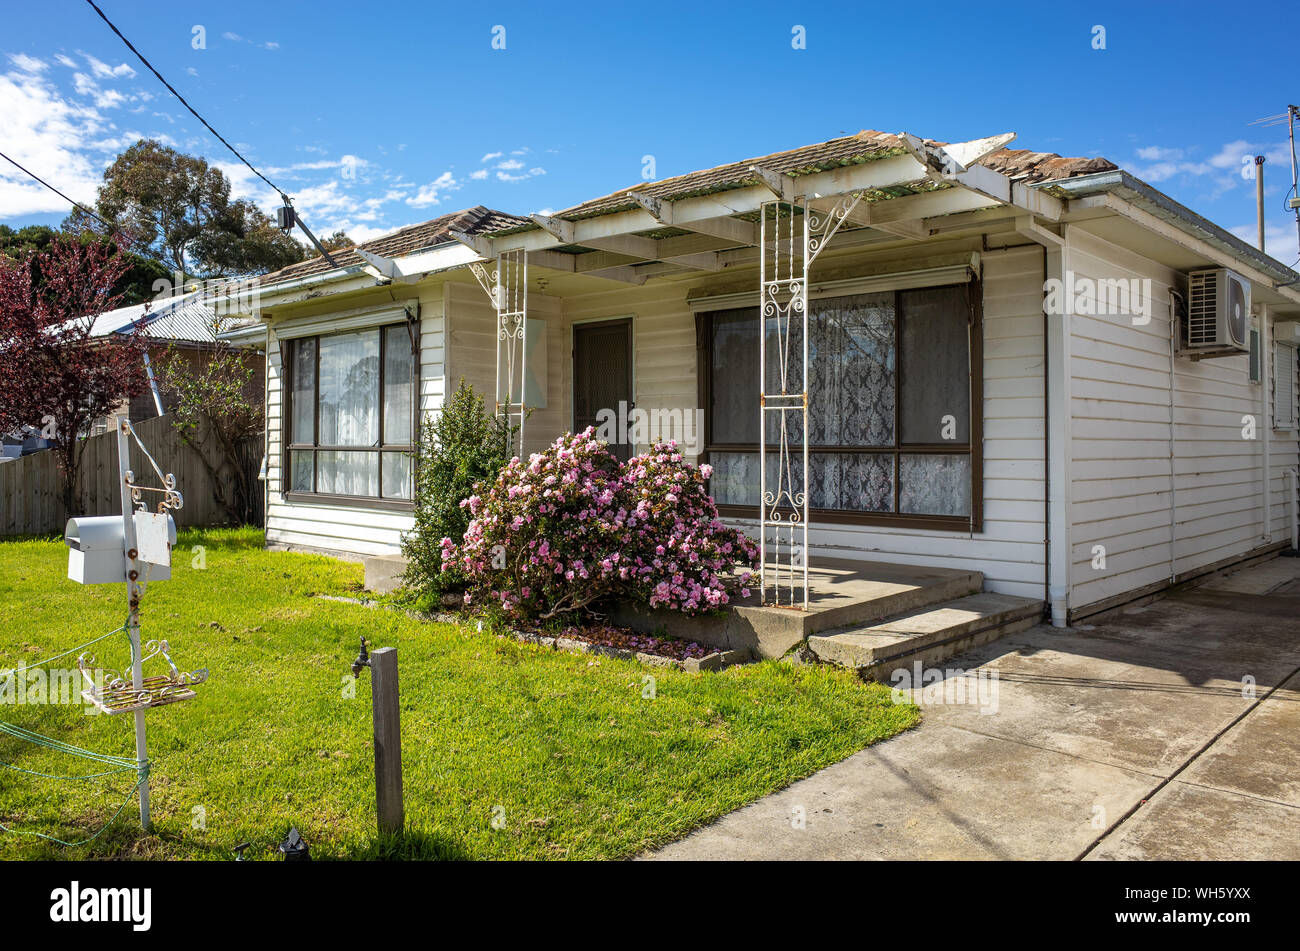 An Australian weatherboard house in the suburb Stock Photo